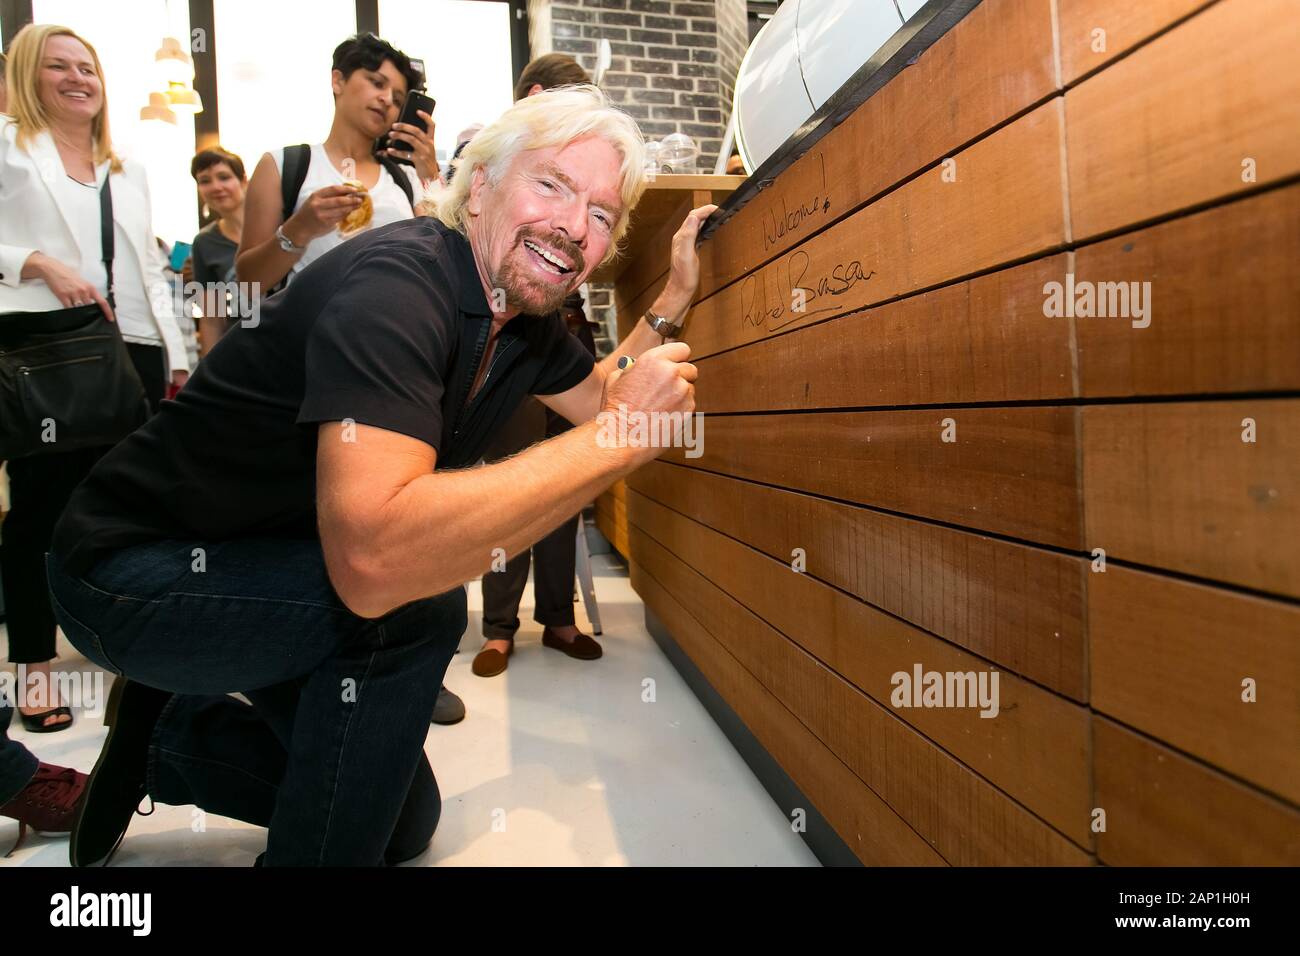 Johannesburg, South Africa - October 02, 2013: Richard Branson signing autographs at Virgin Mobile Guinness World Record attempt and achieved fitting Stock Photo